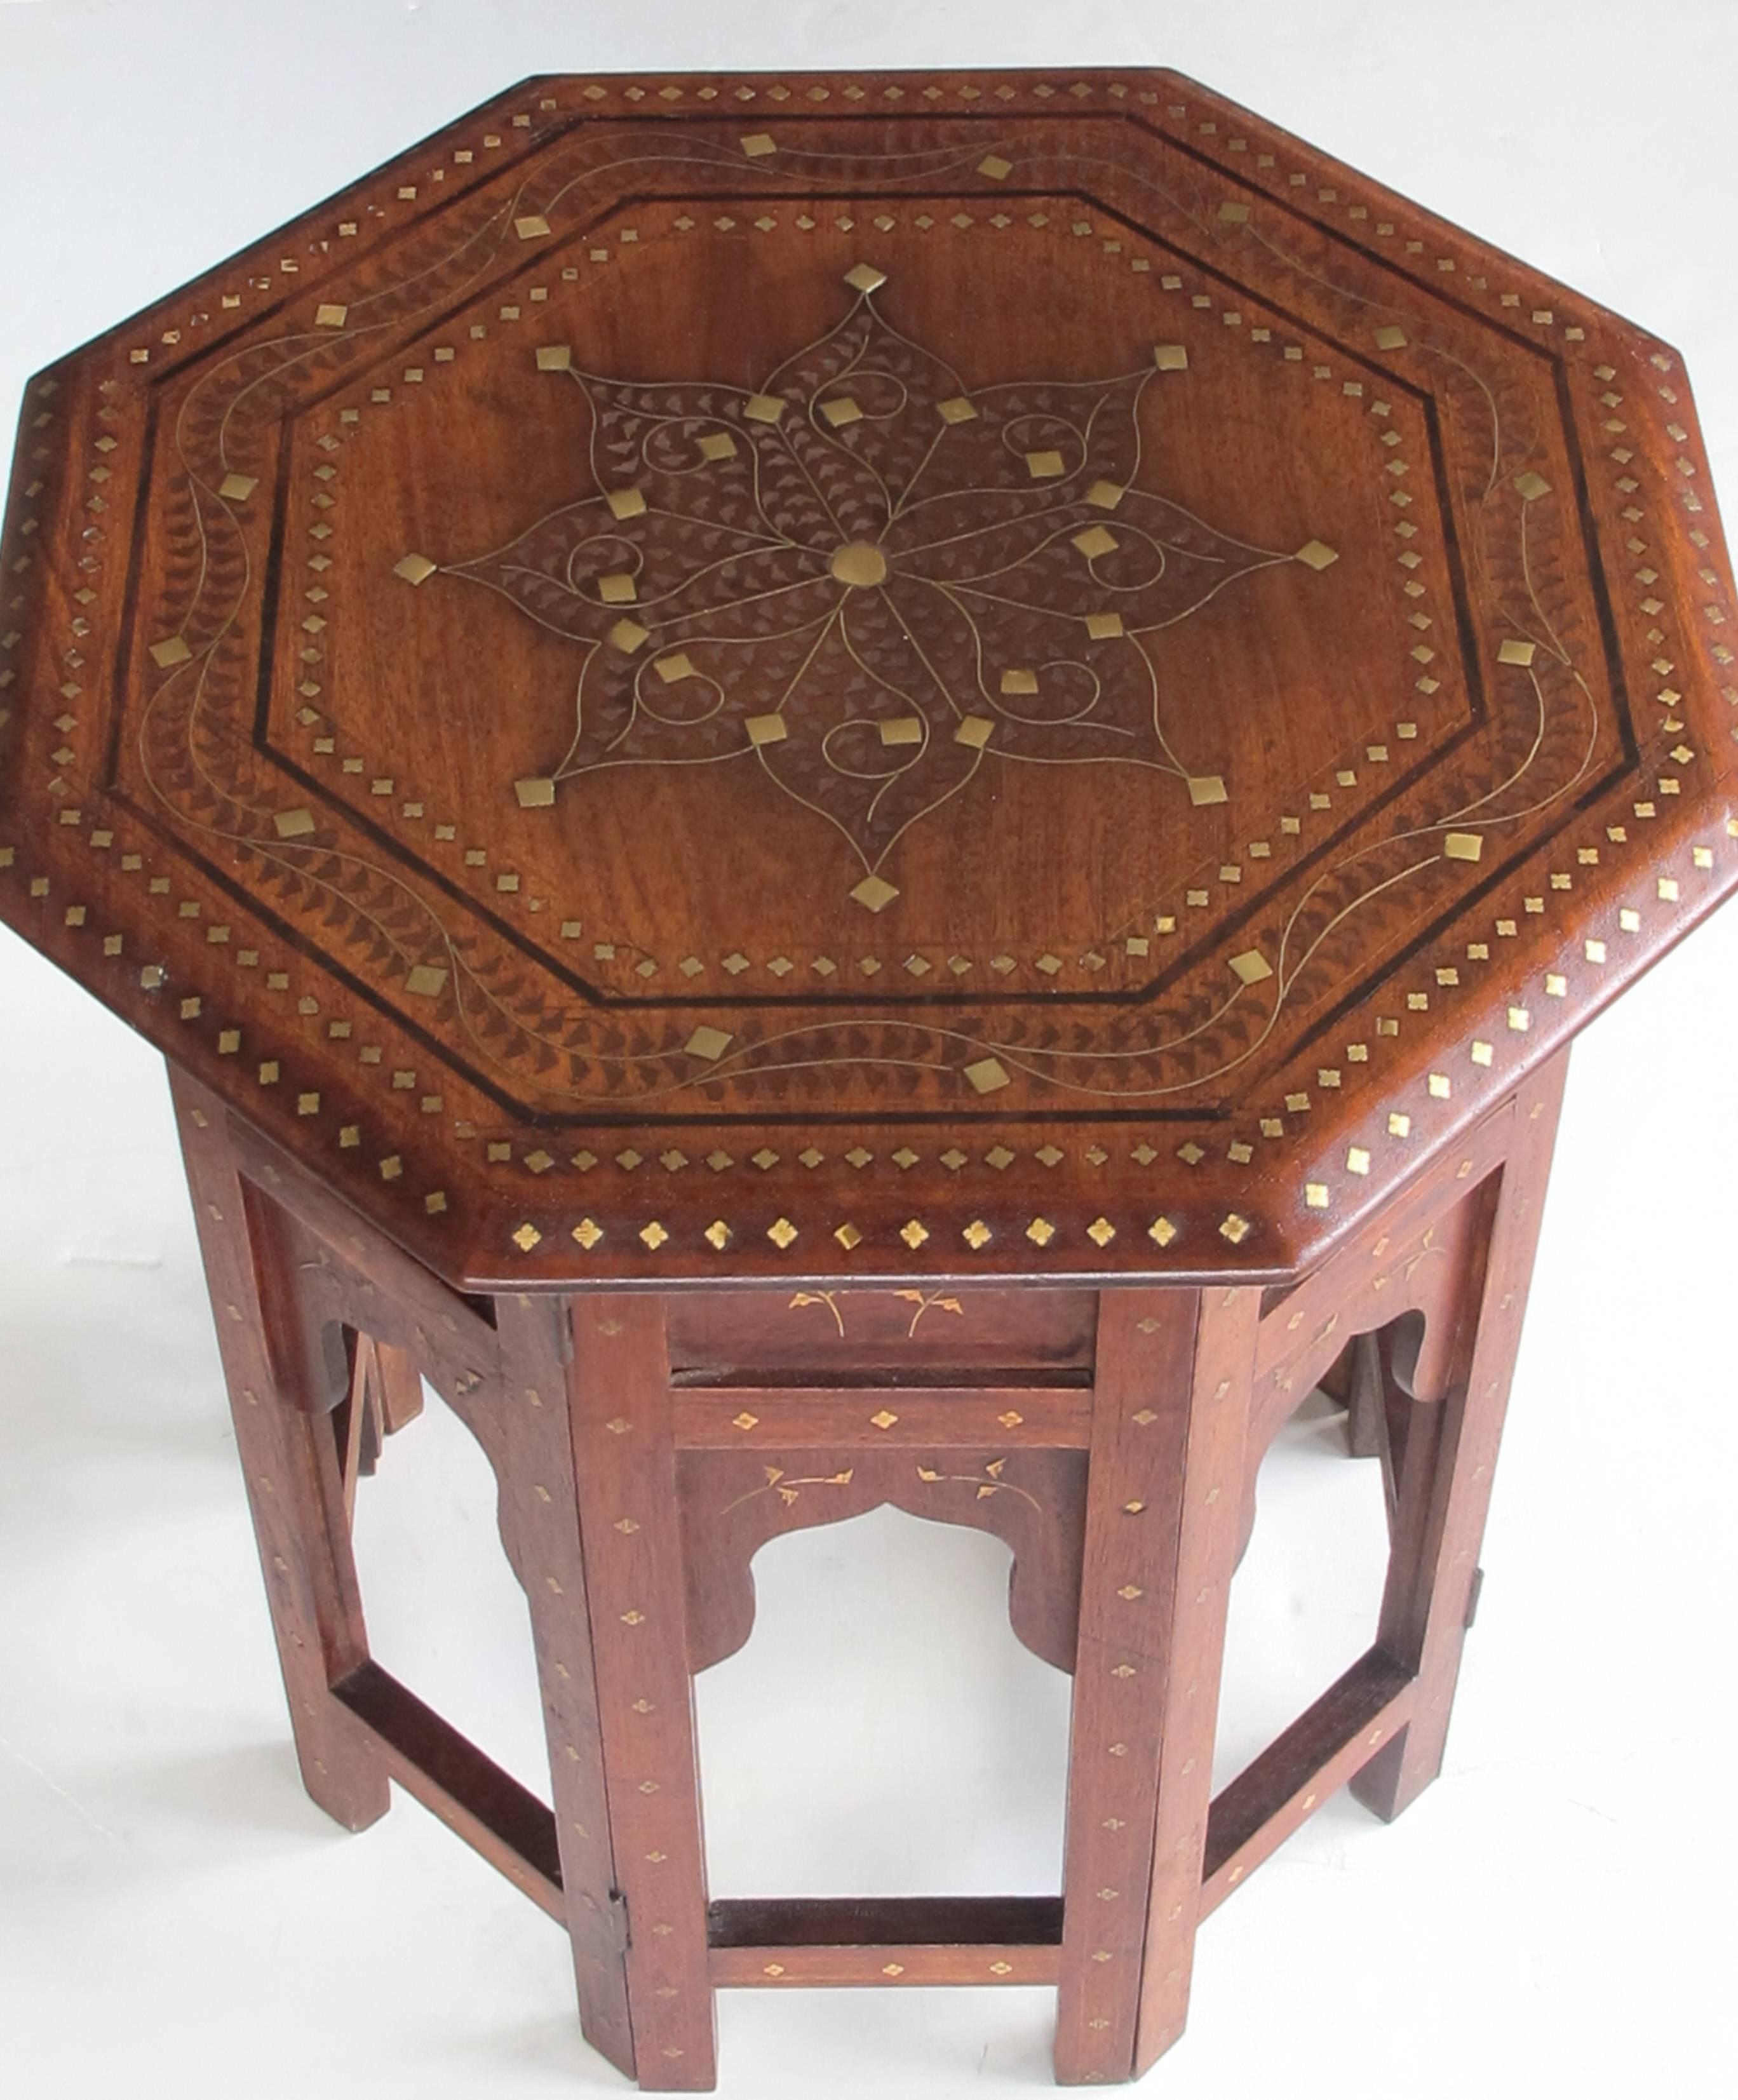 A very versatile and useful side table with octagonal top centring an intricately brass and pewter inlaid stylized star medallion within a meandering floral vine border; raised on an arabesque base with similar inlay.